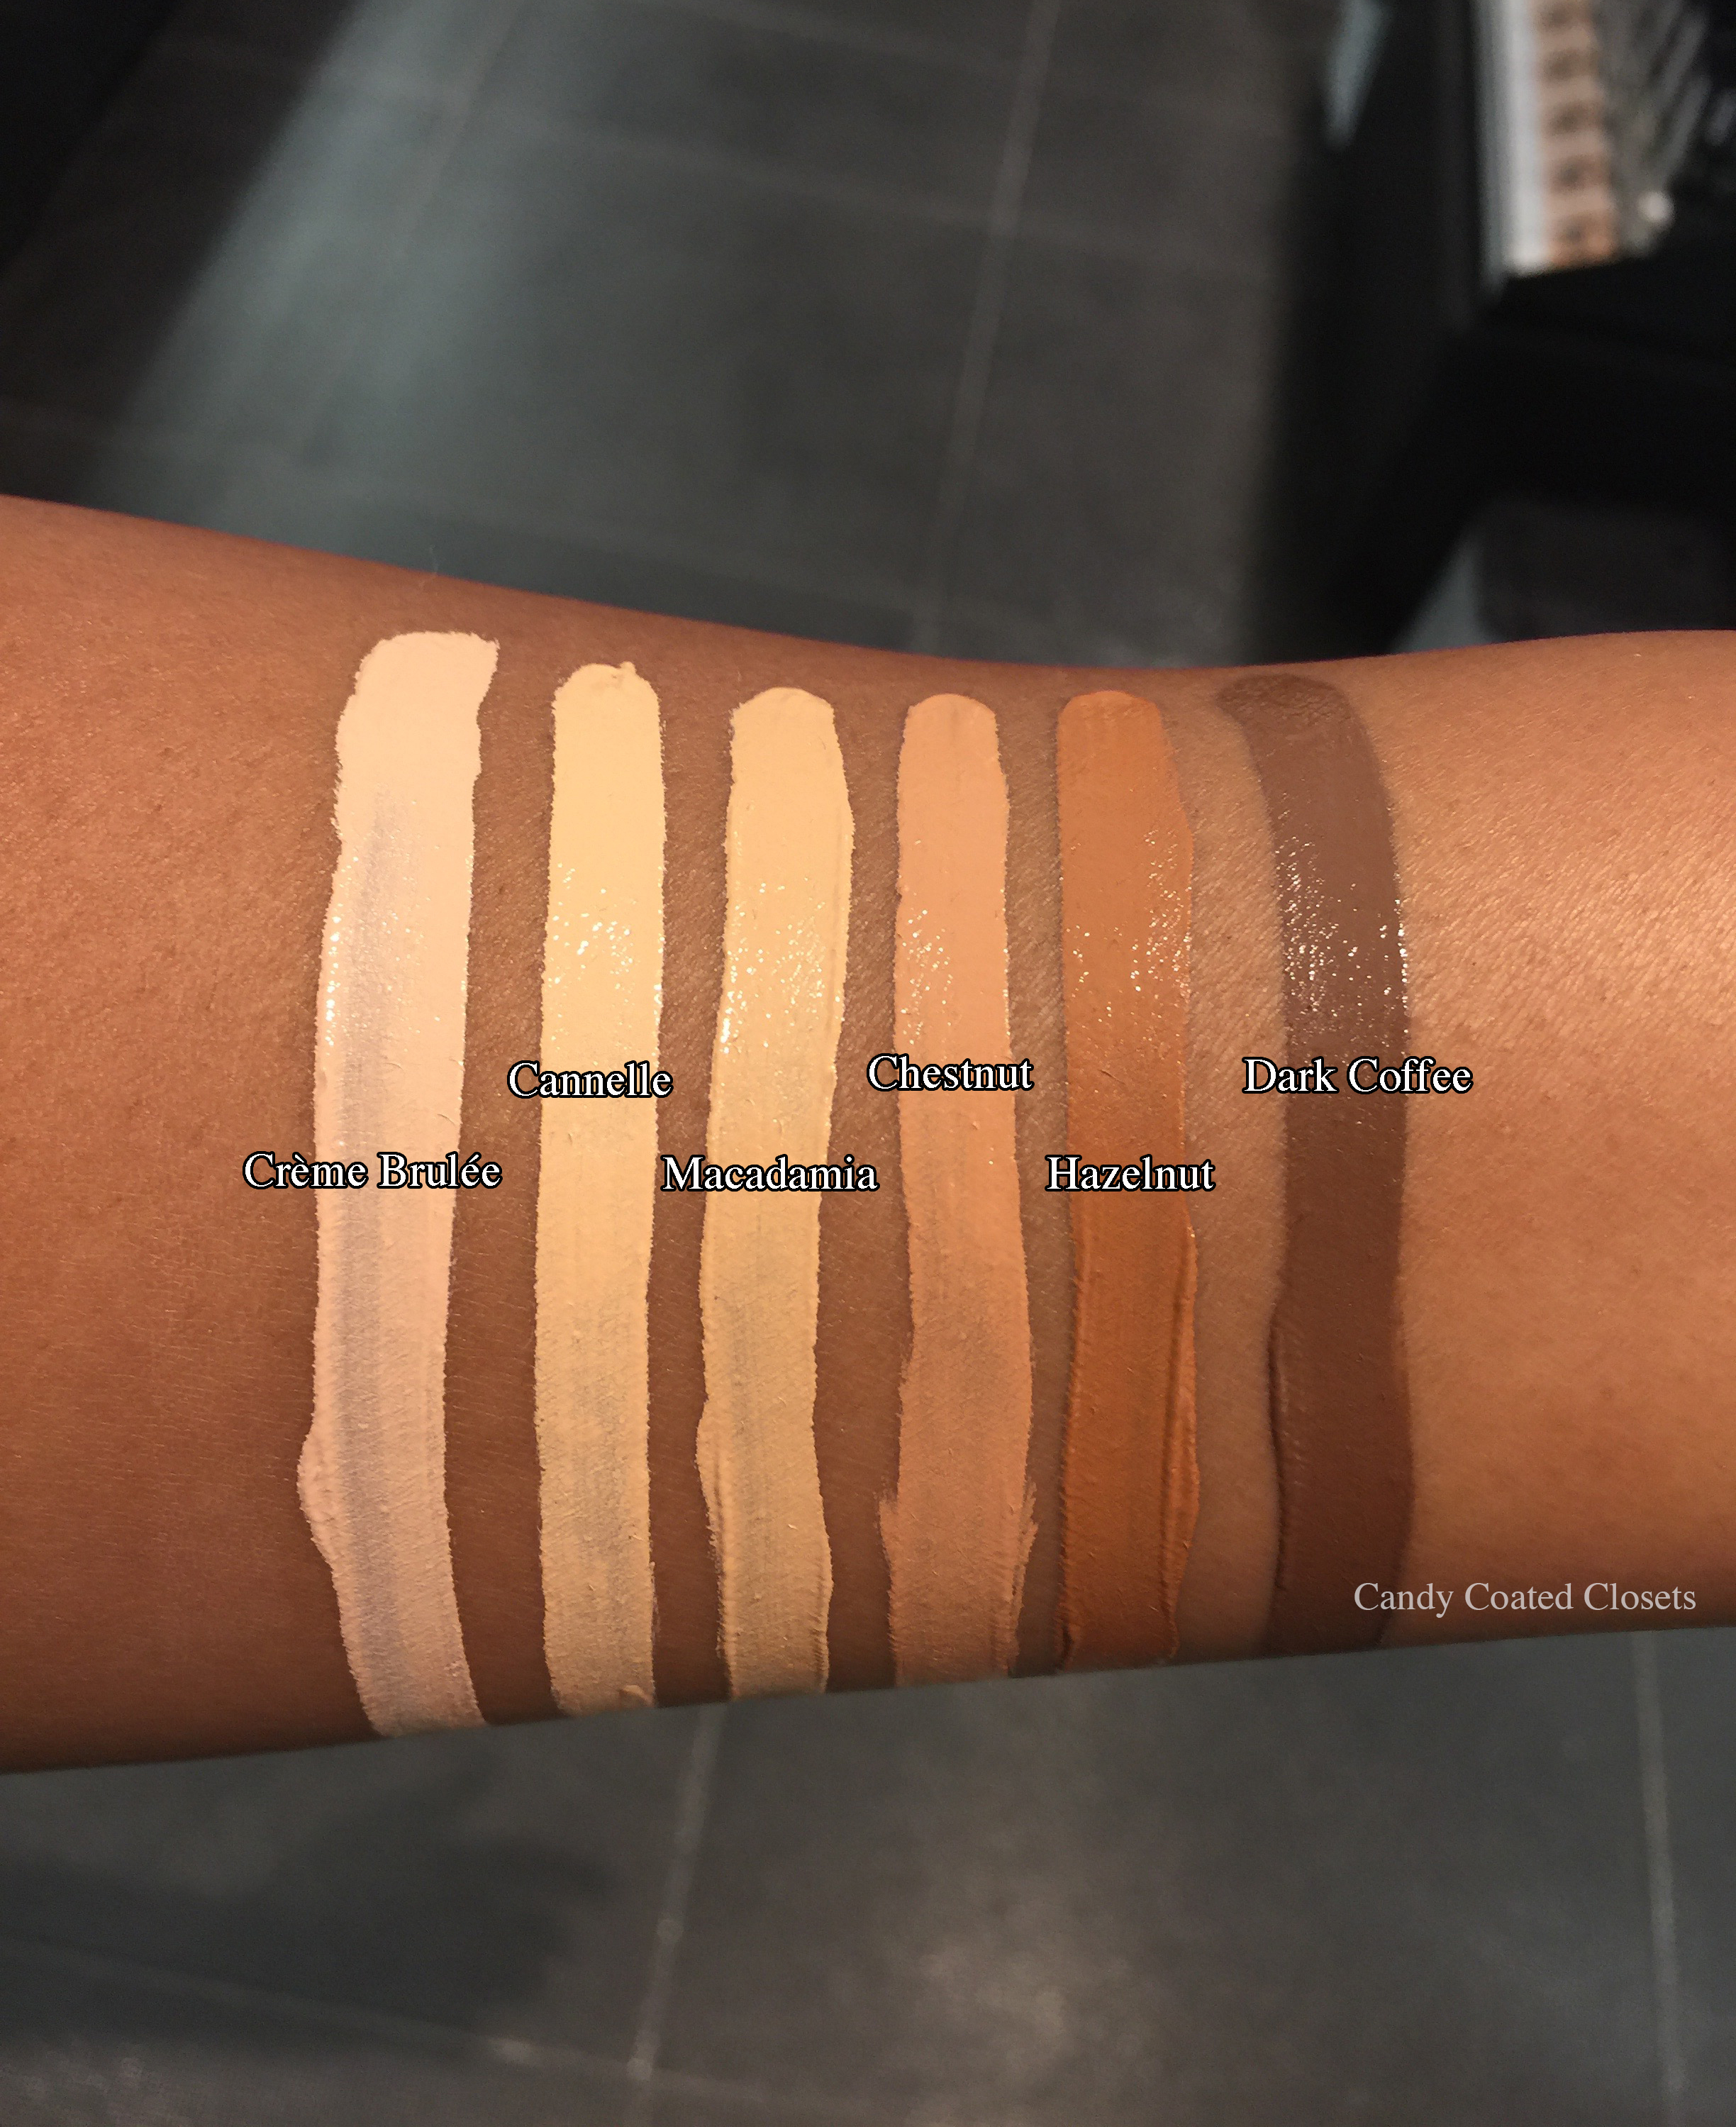 NARS Radiant Creamy Concealer Review, Swatches & Photos – Crème Brulée, Cannelle, Macadamia, Chestnut, Amande, Cafe, Cacao & Dark Coffee — Candy Coated Closets